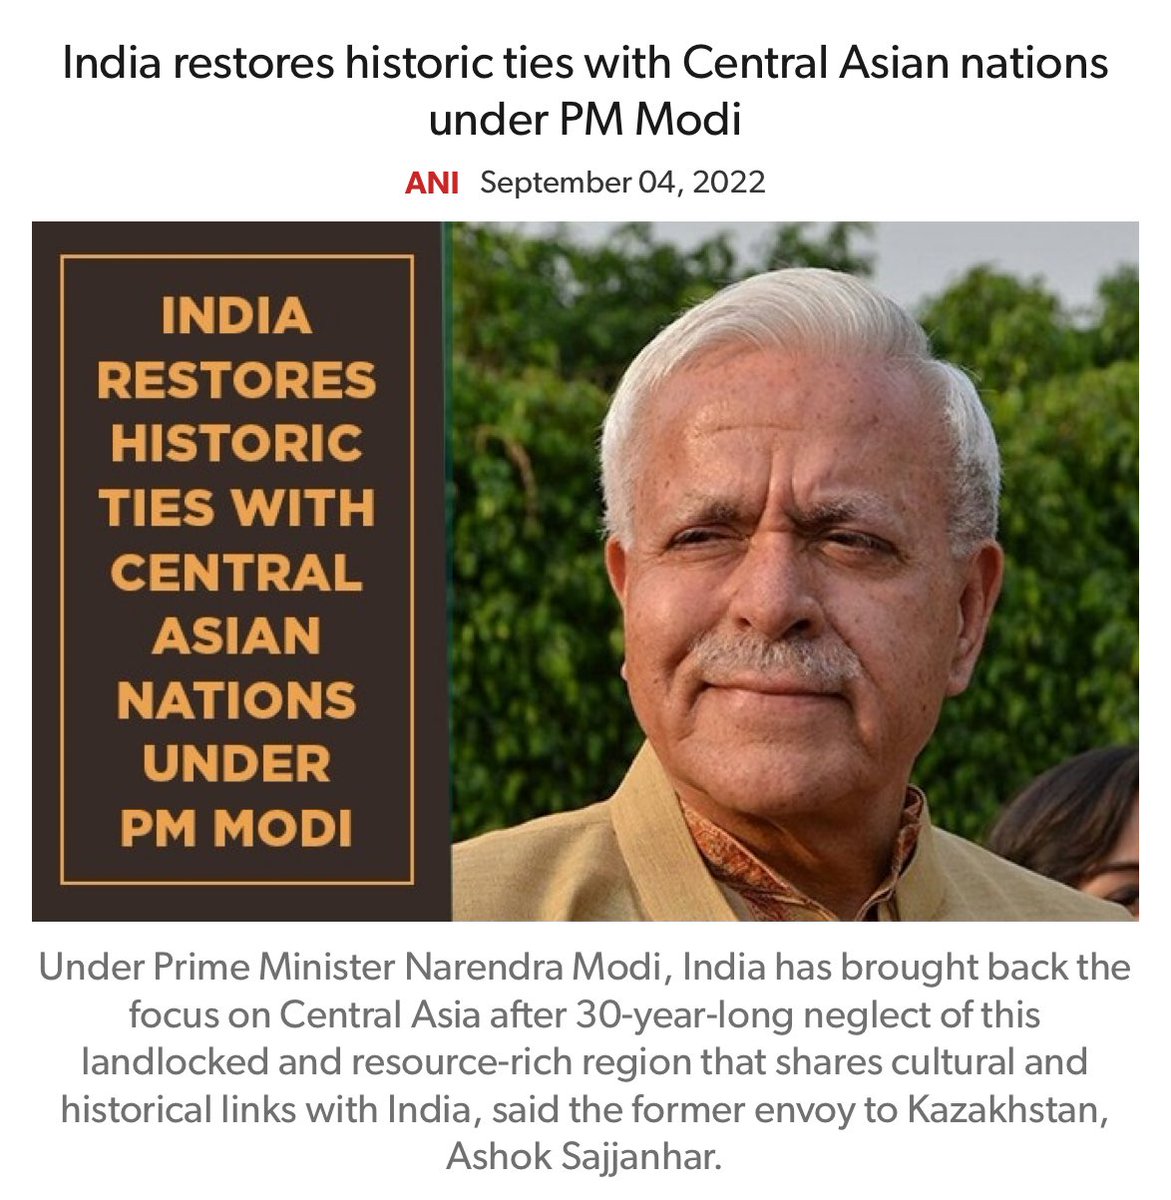 India restores historic ties with Central Asian nations under PM Modi aninews.in/news/world/asi… via NaMo App